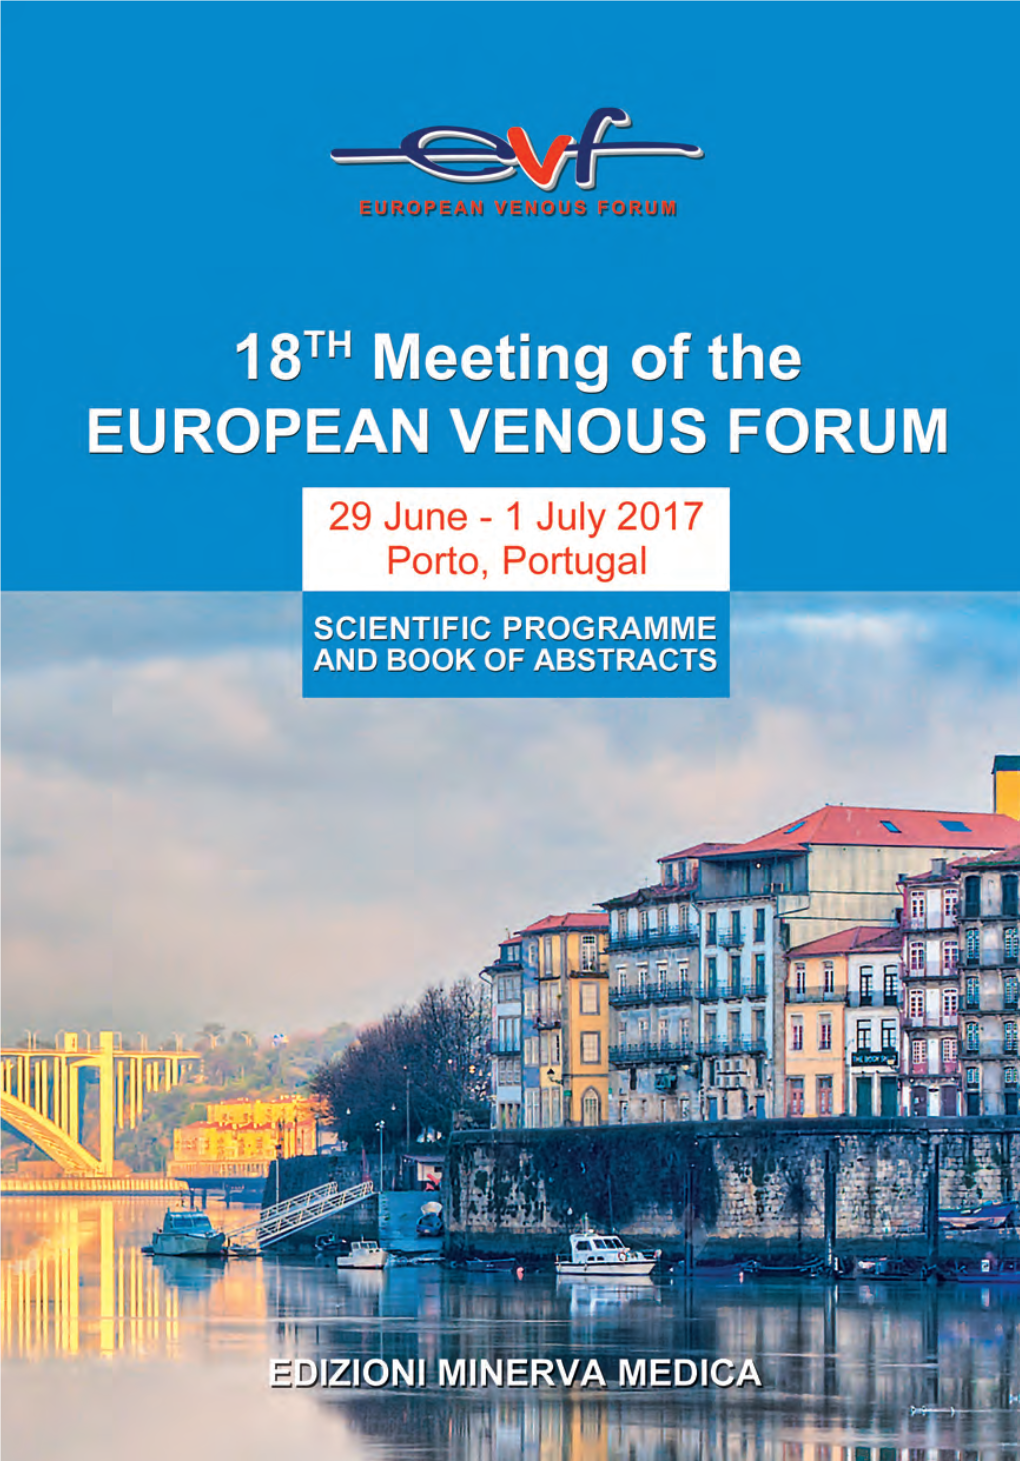 18Th Meeting of the European Venous Forum 29 June - 1 July, 2017 Porto, Portugal